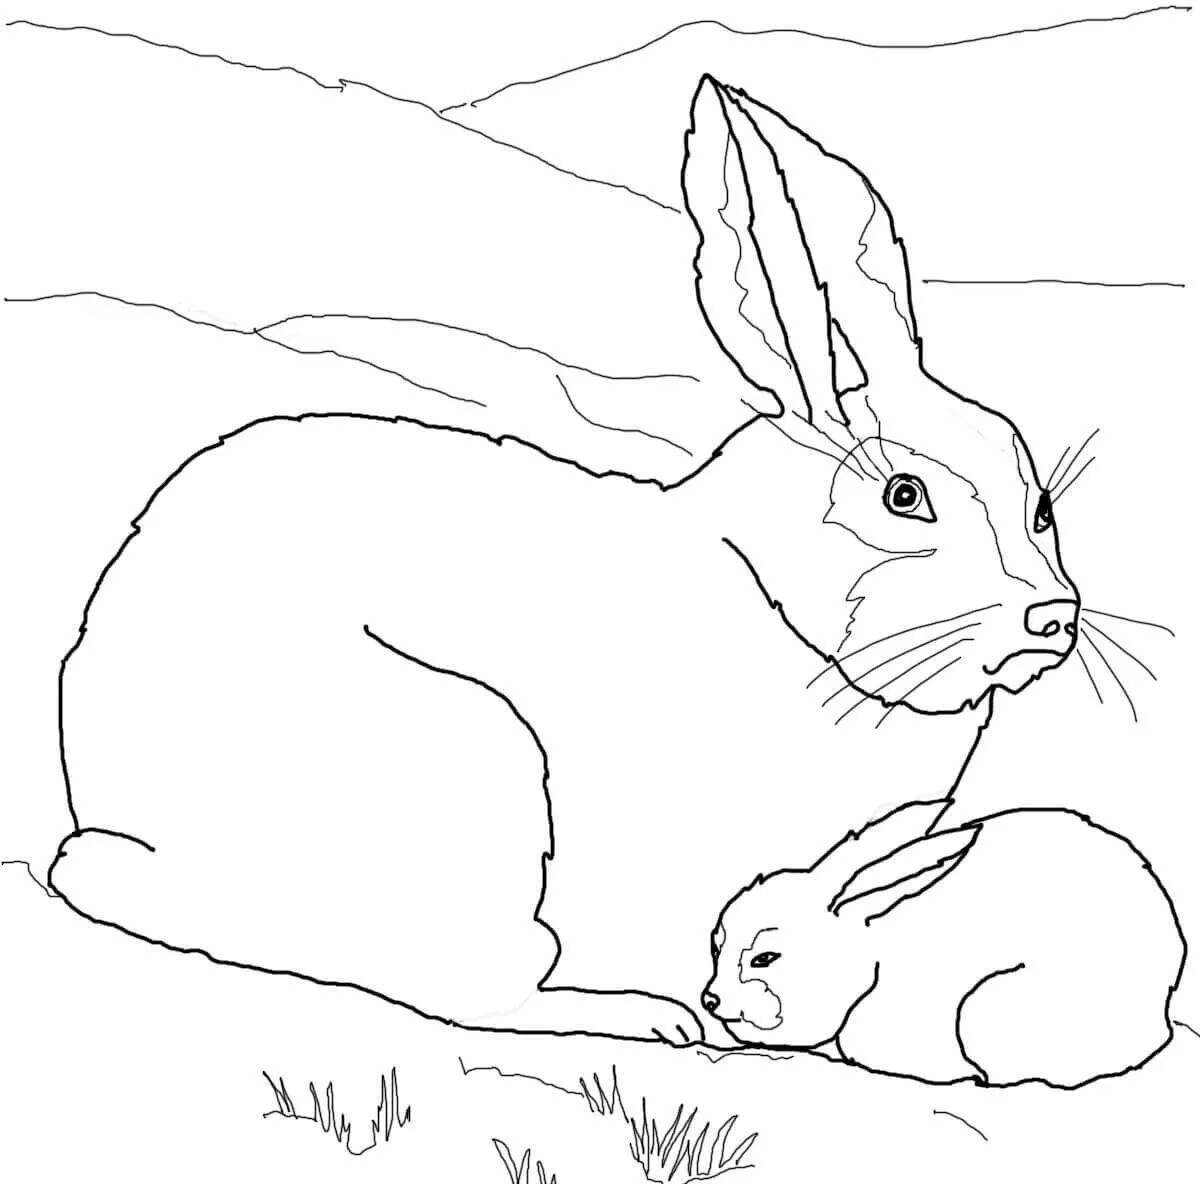 Attracting wild animals and babies coloring page